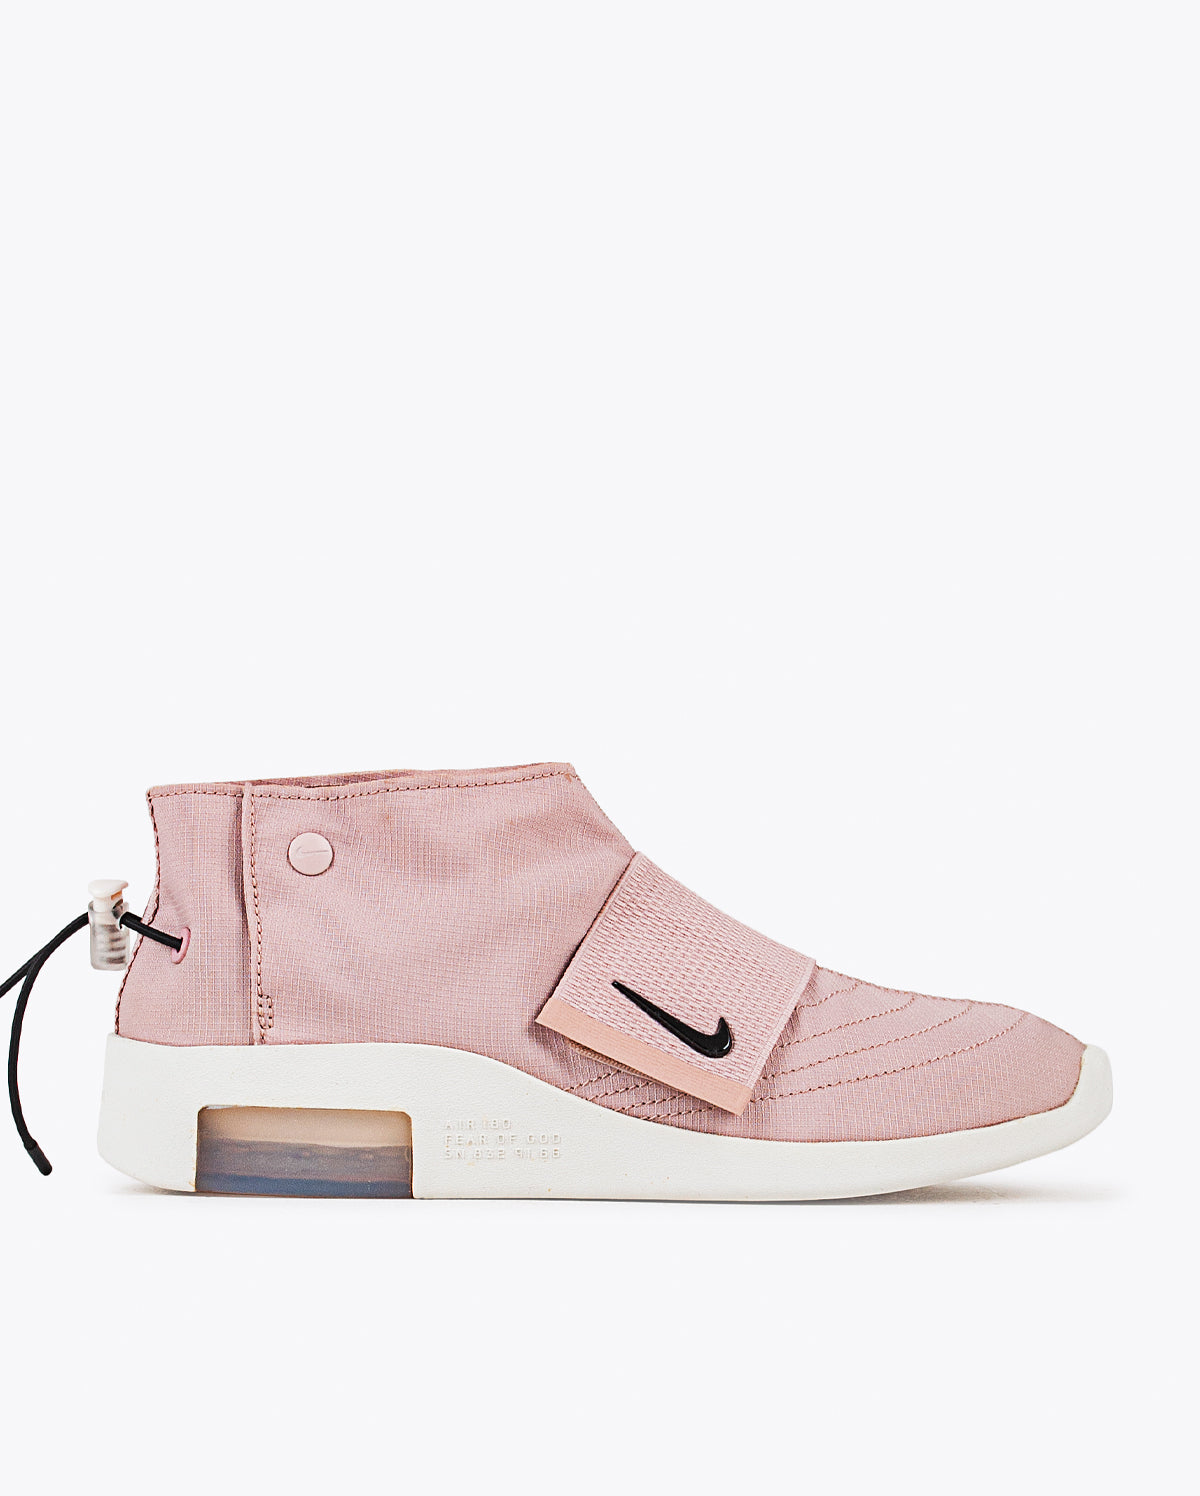 Ambientalista Asesinar tapa Nike Air Fear Of God Moccasin